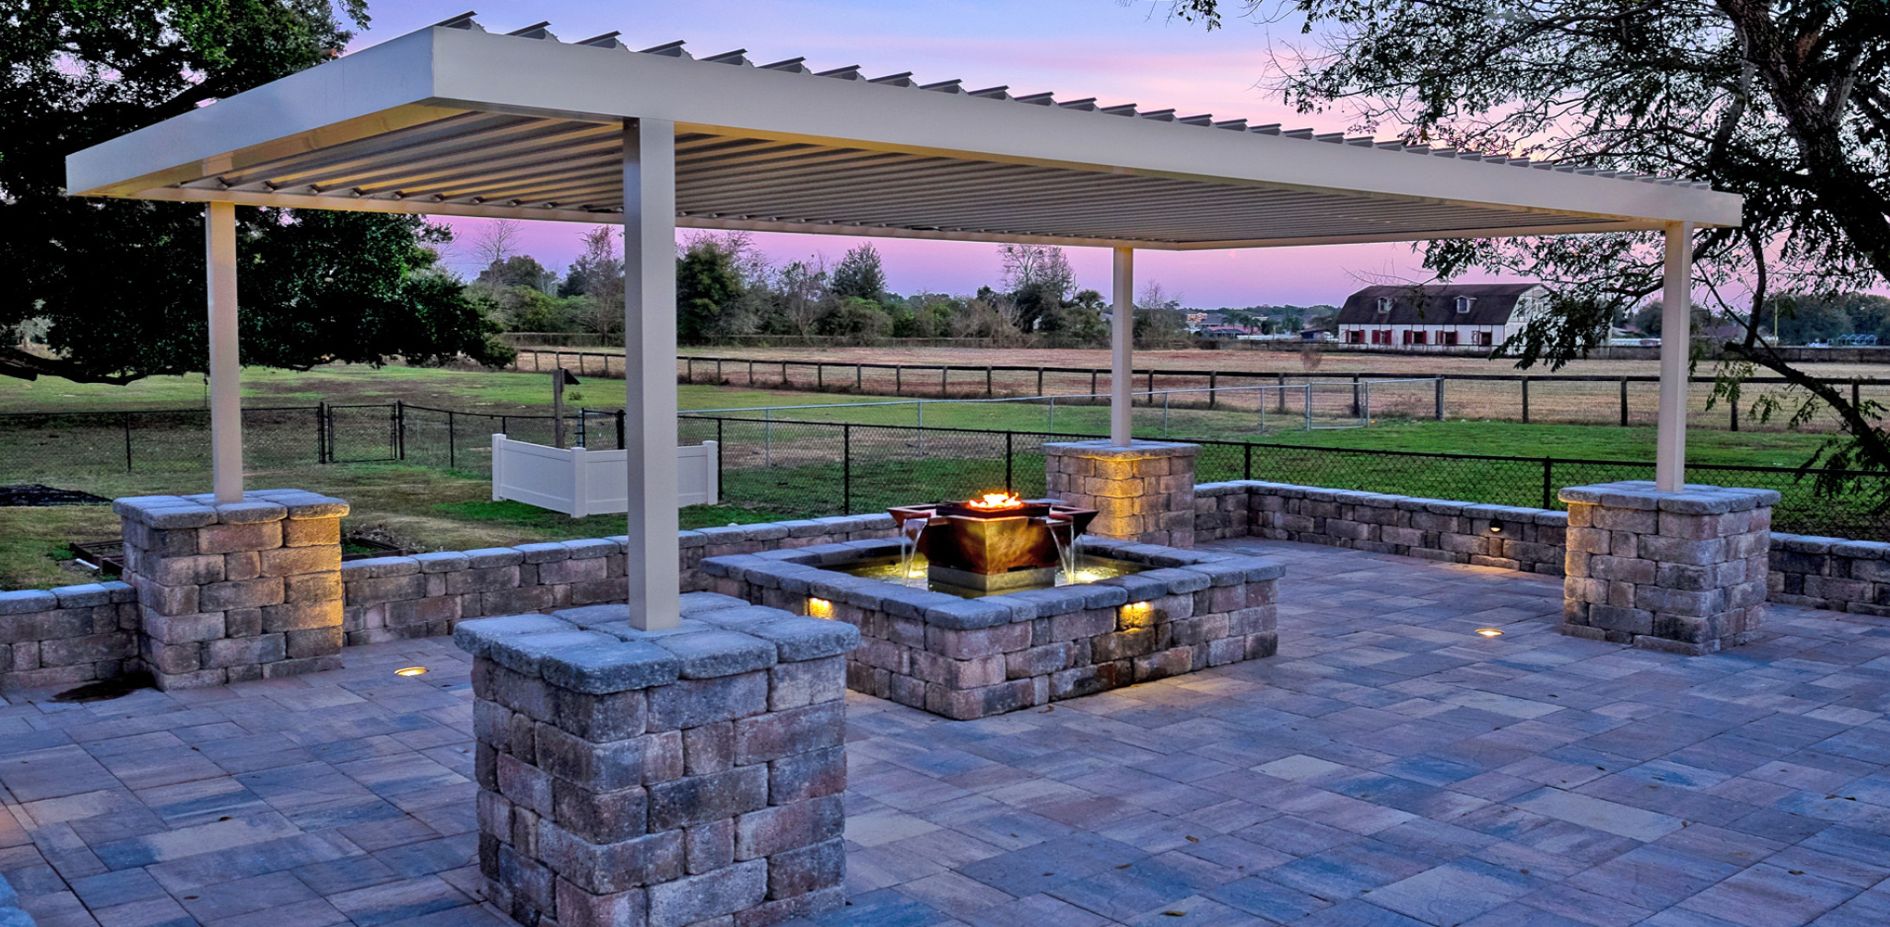 A pergola shades an outdoor seating area in the sunset